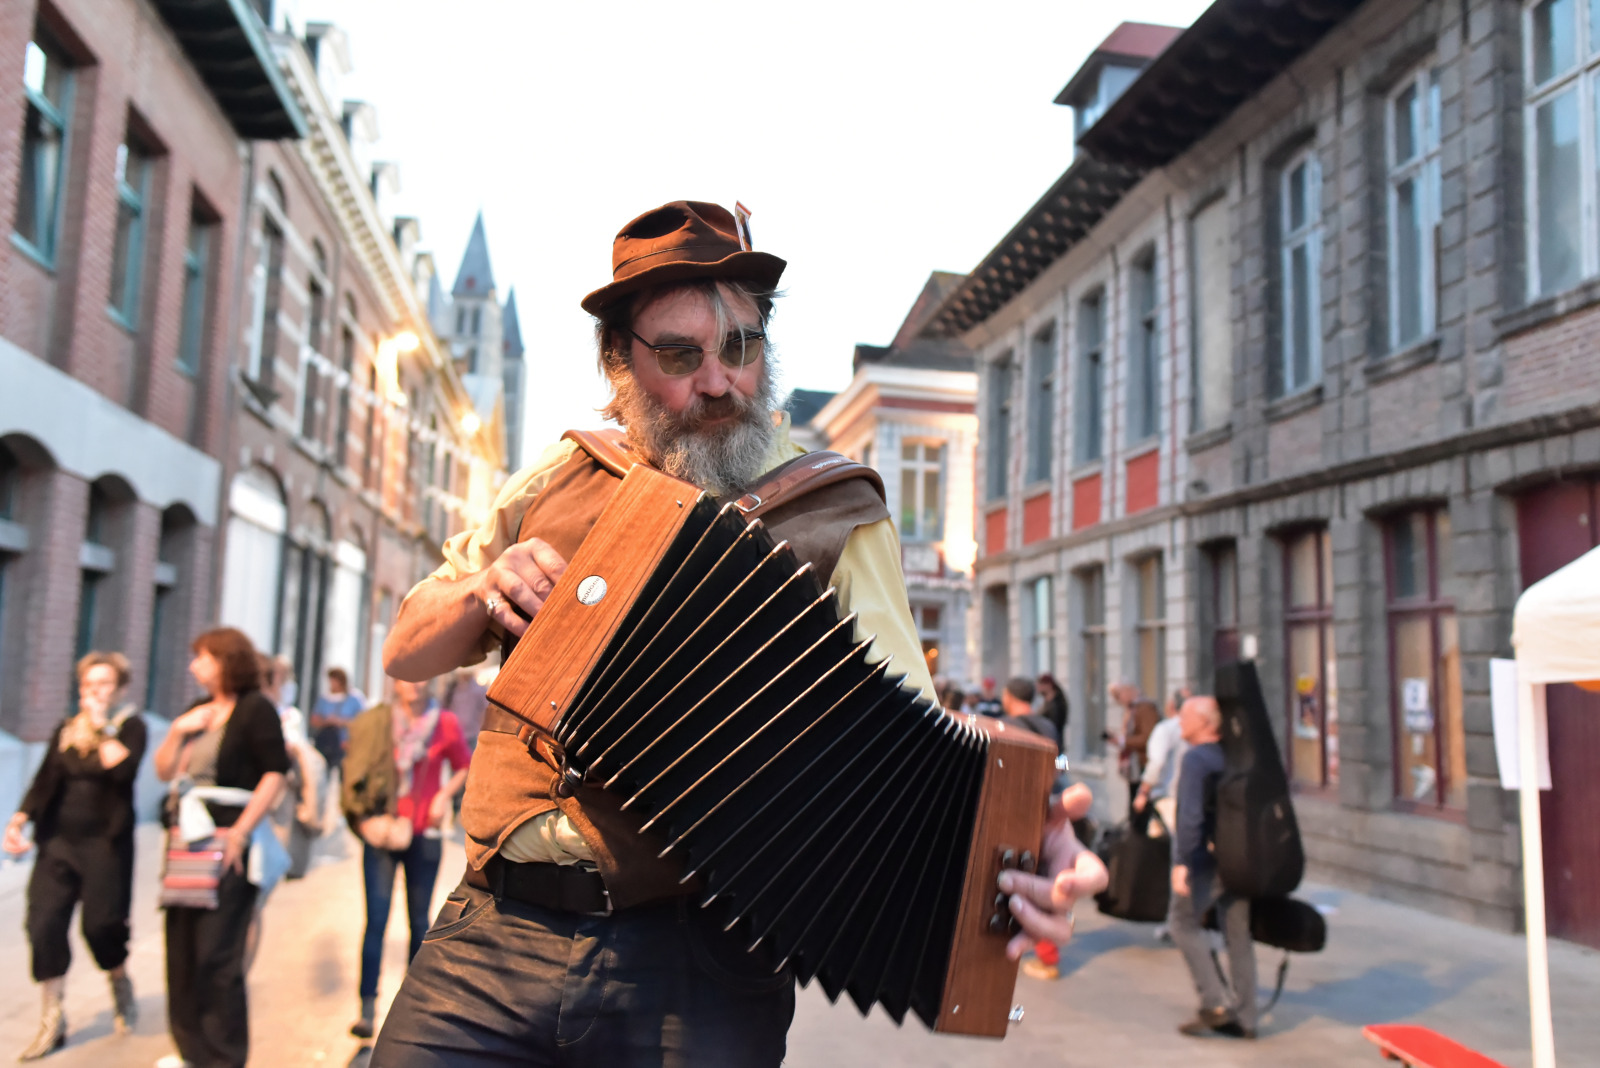 Accordionist playing in the streets of Tournai